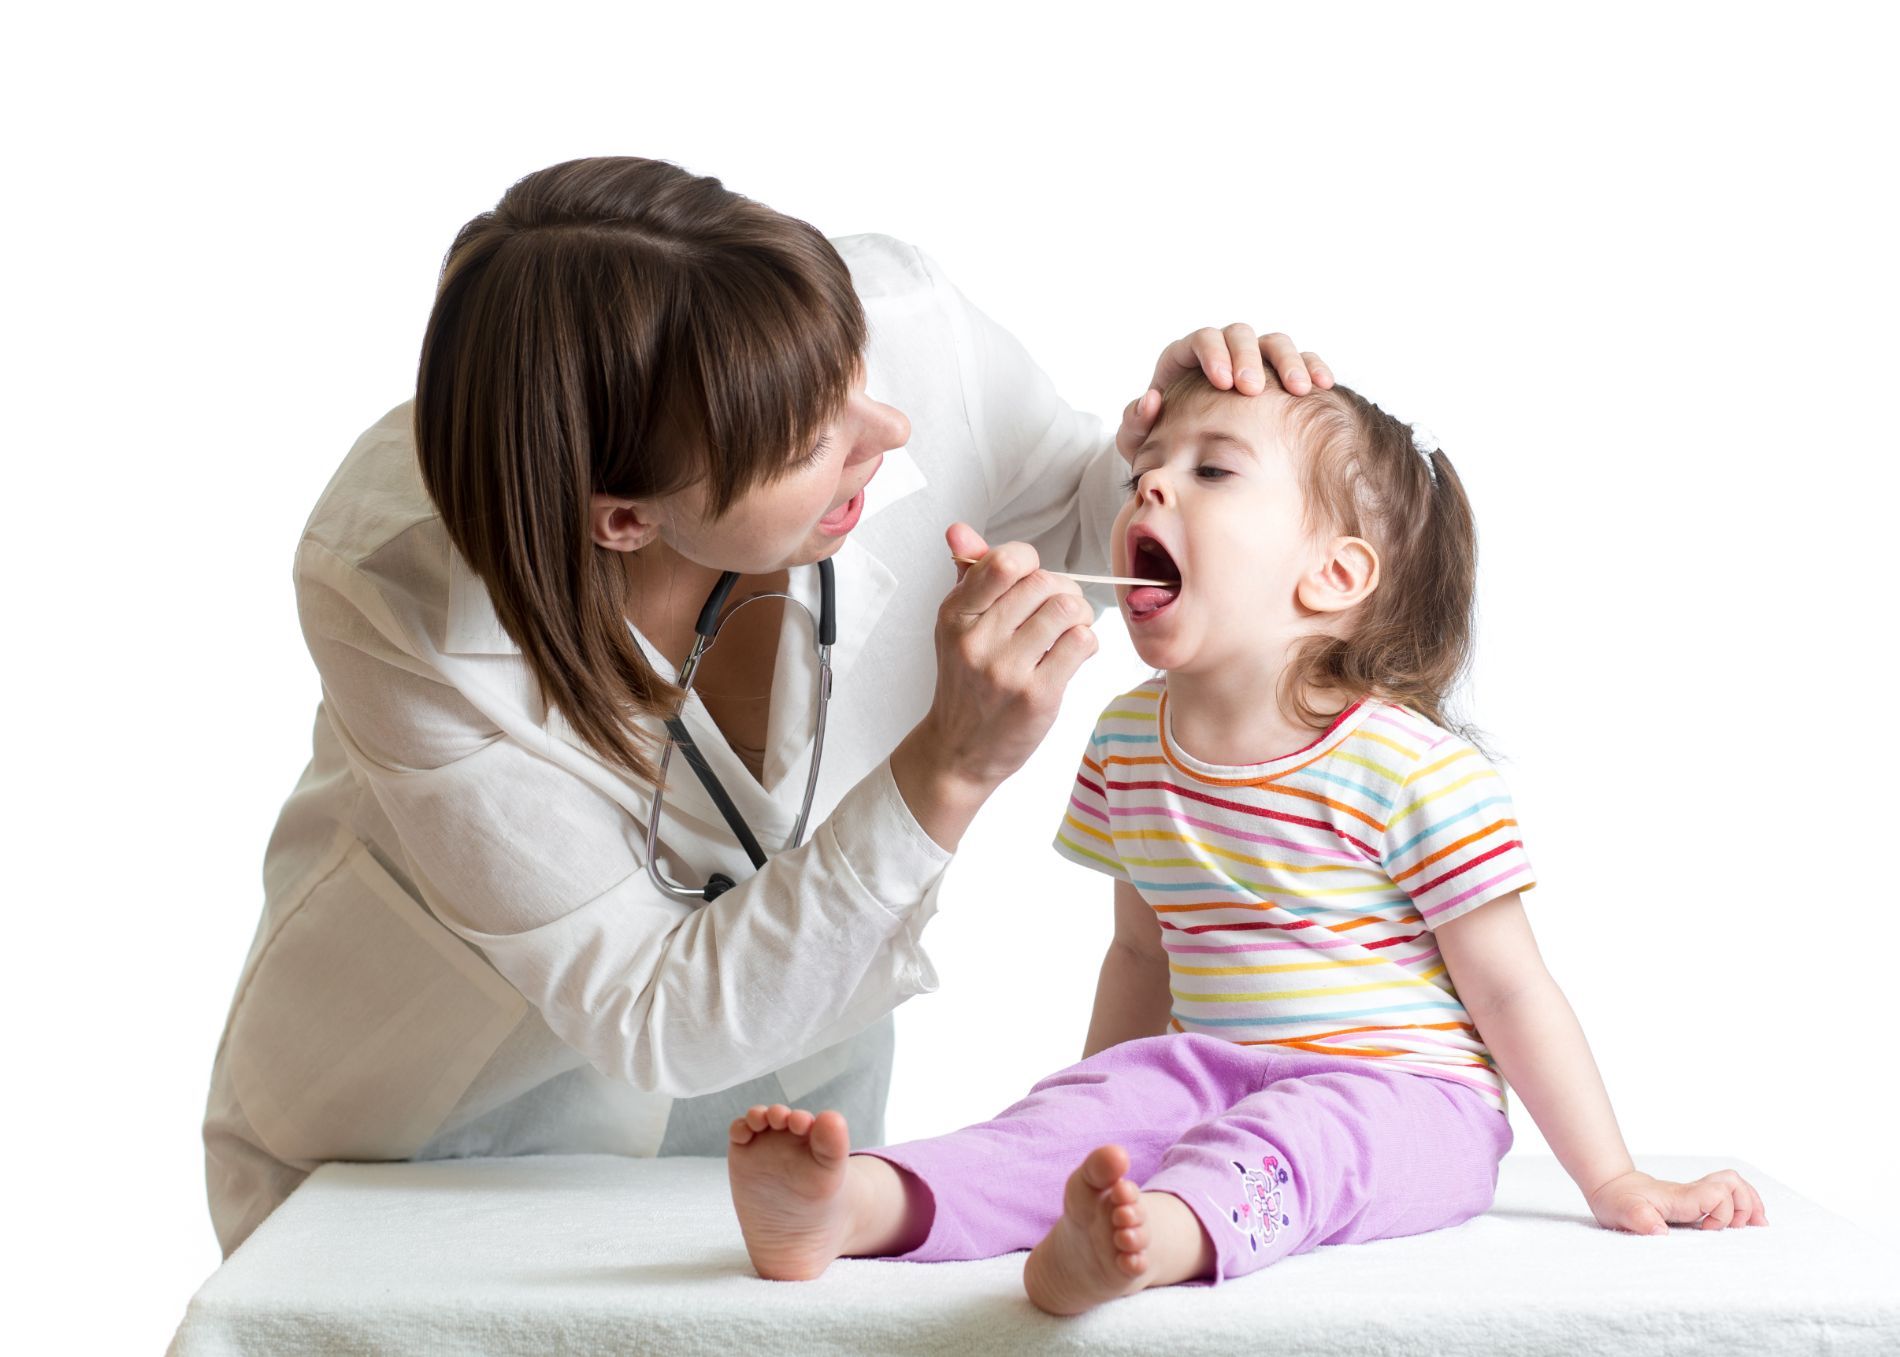 A doctor examining a young child's tonsils